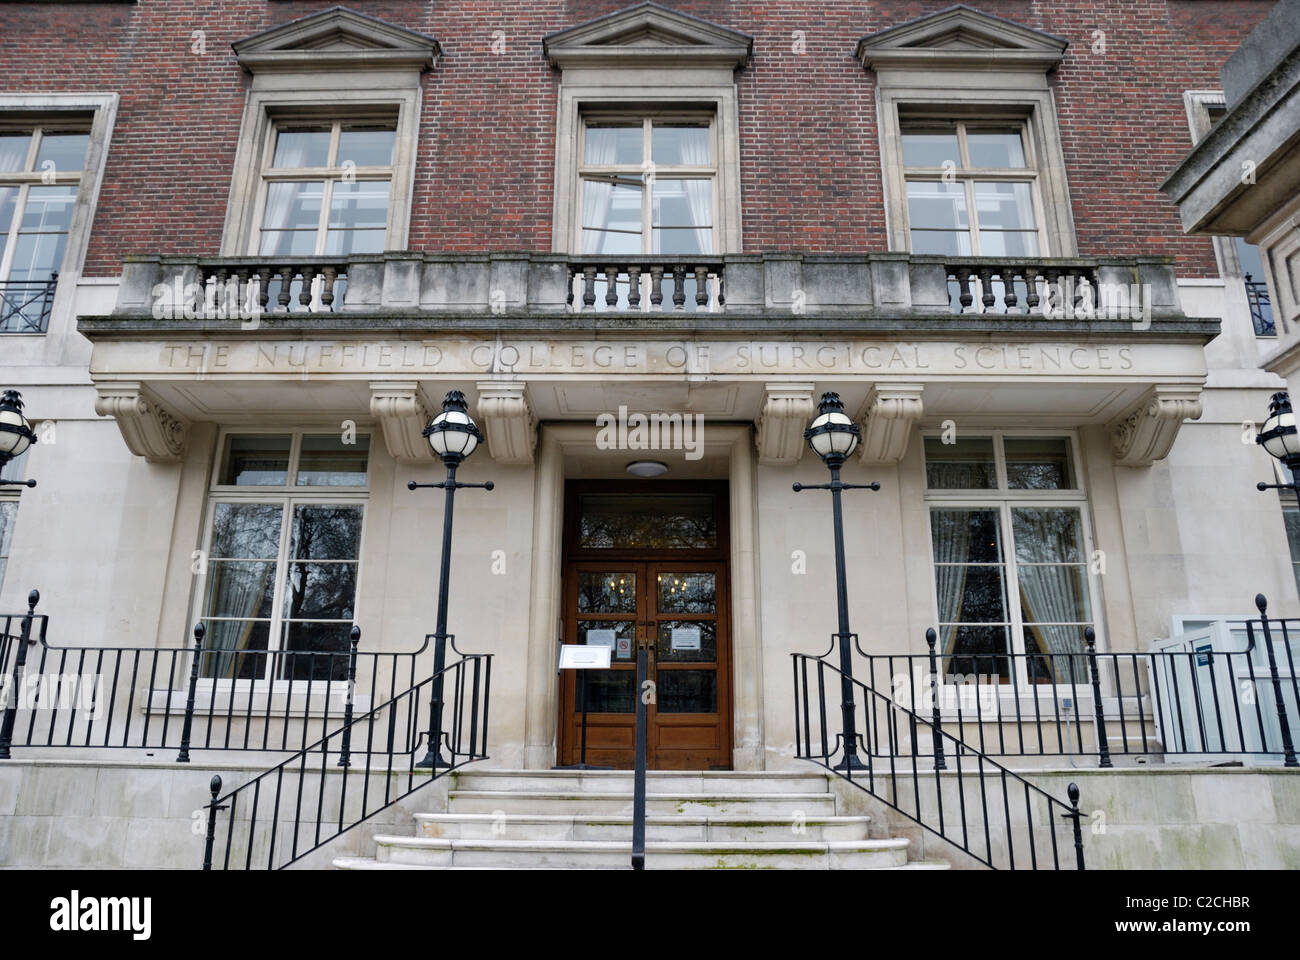 Nuffield College Of Surgical Sciences, Lincolns Inn Fields, London, England Stock Photo